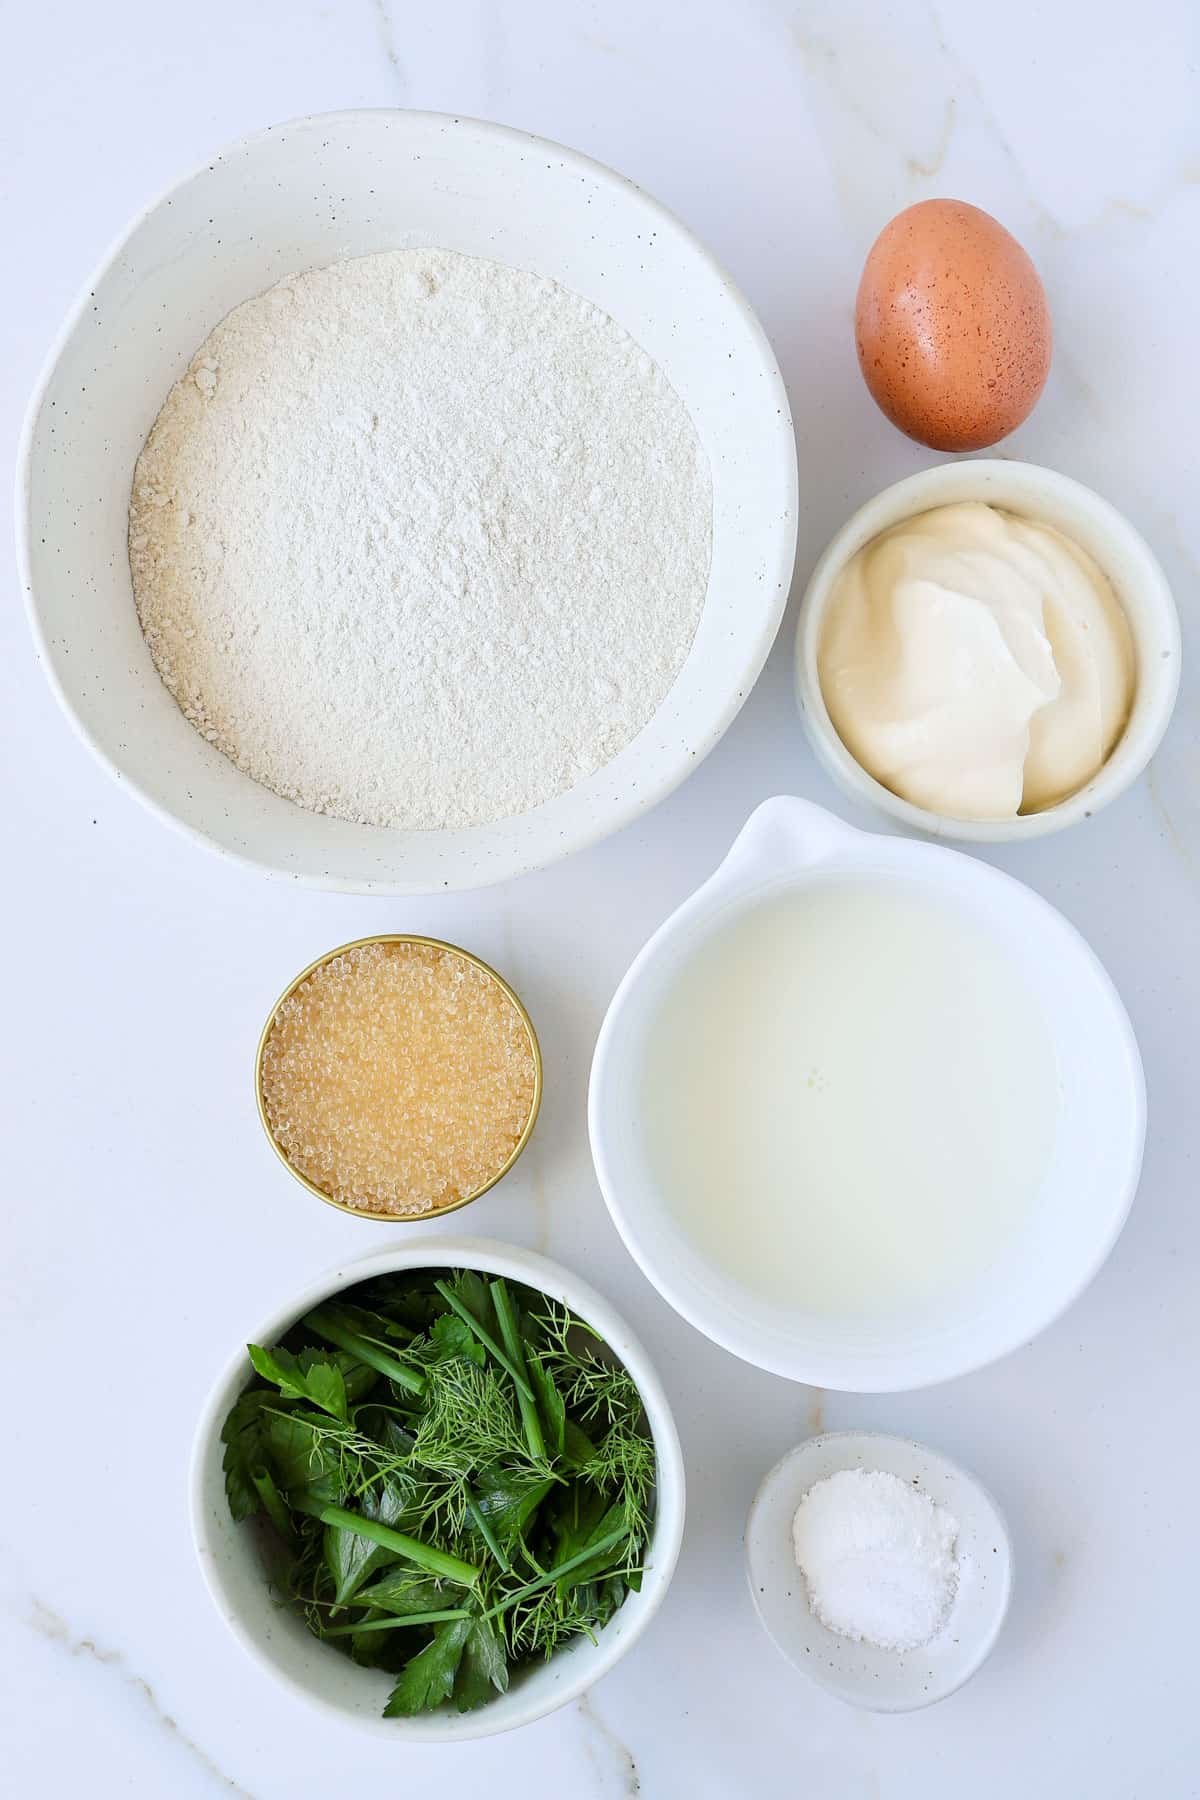 Ingredients shown to make the recipe.